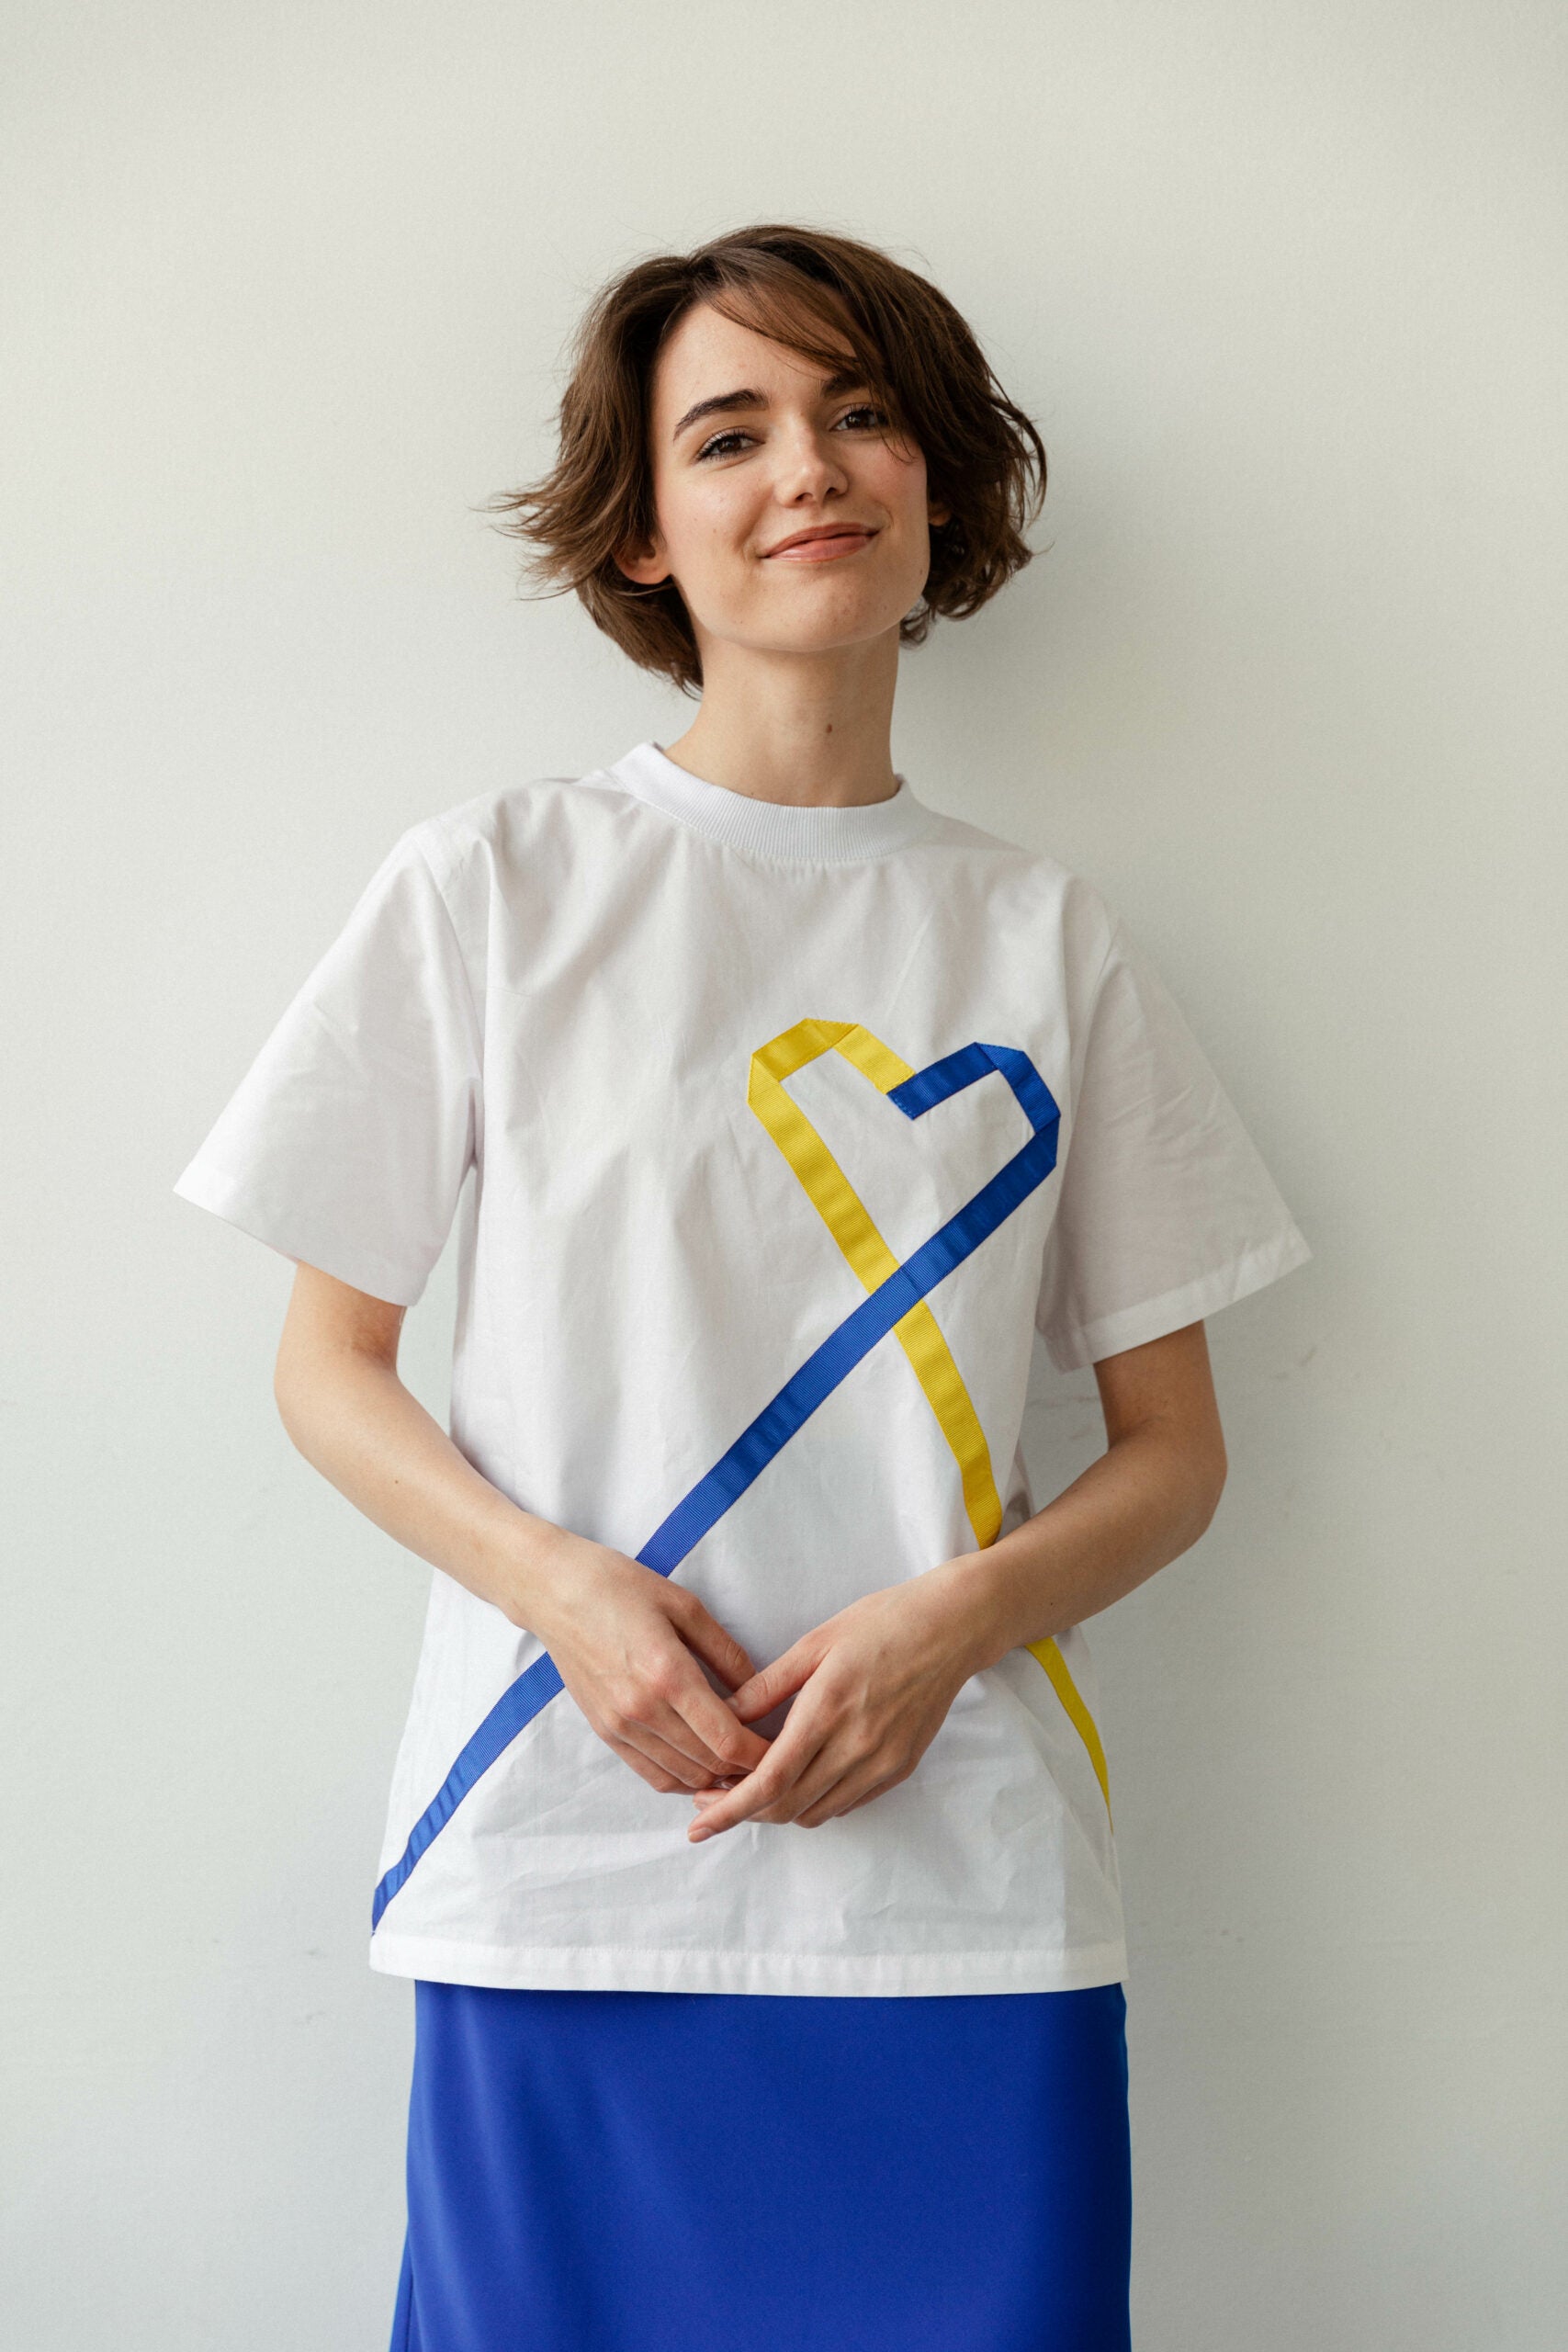 T-shirt heart with yellow and blue ribbons